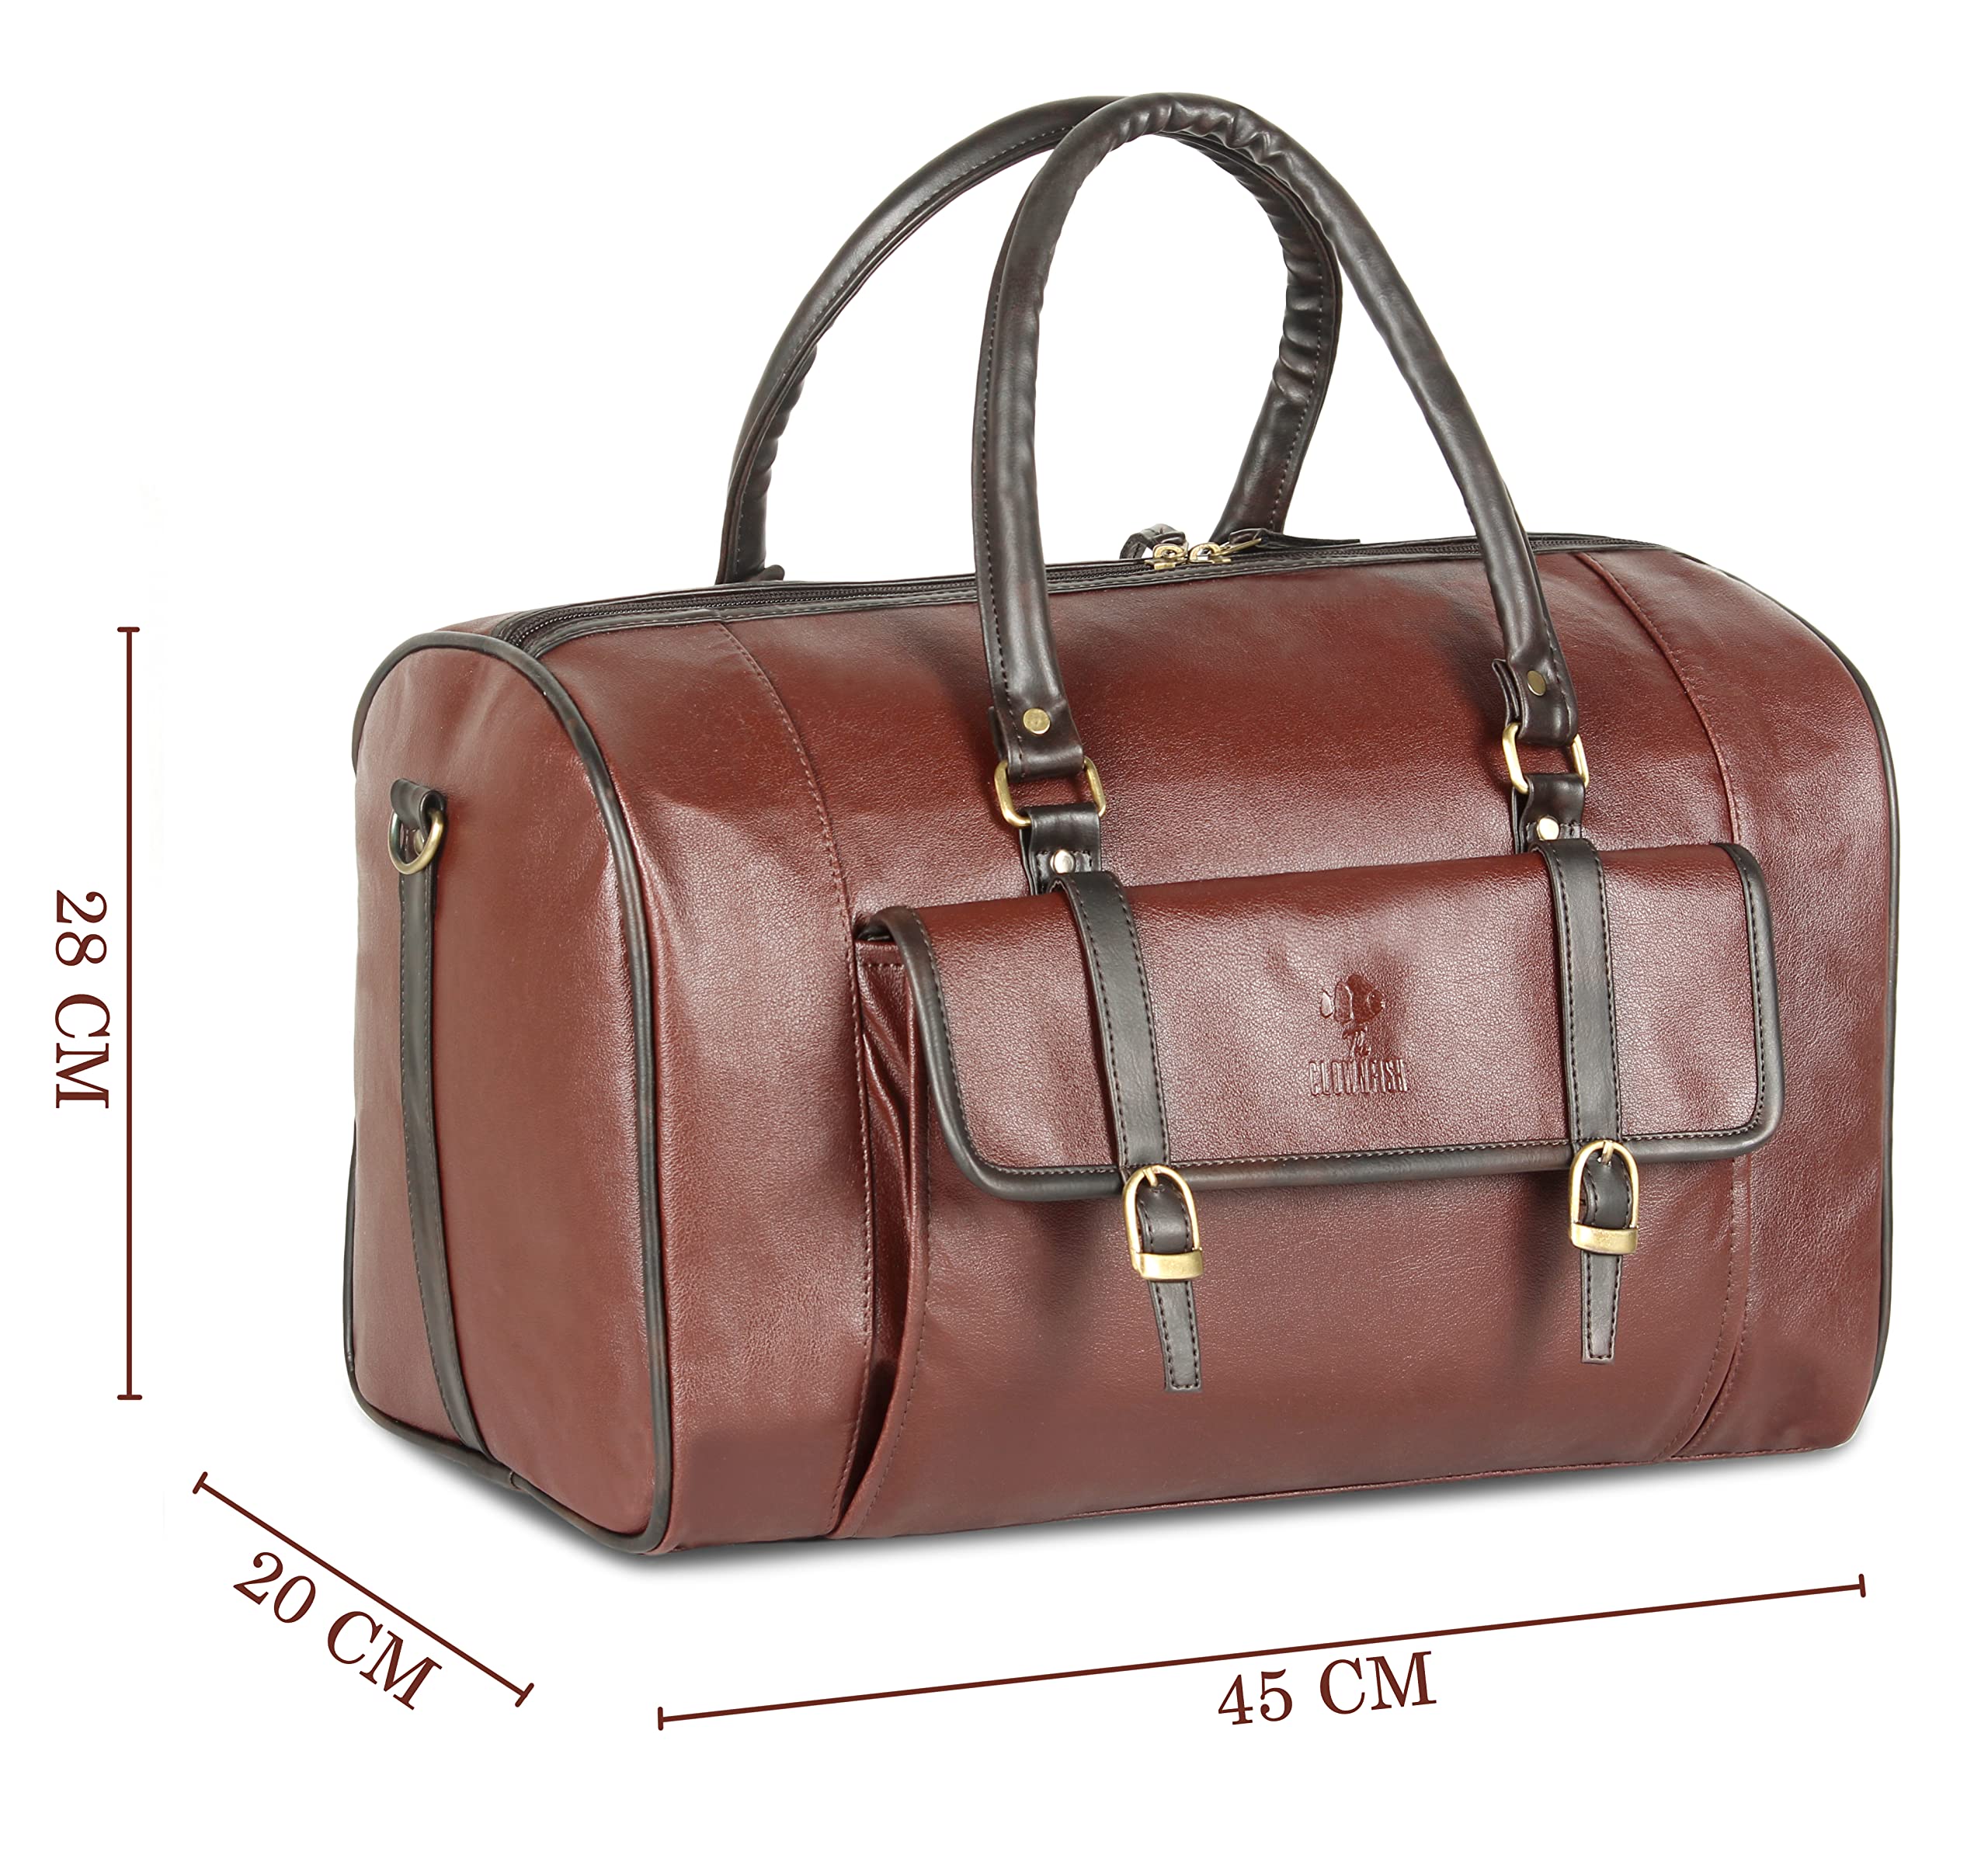 The Clownfish Arlo 25 litres Unisex Faux Leather Travel Duffle Bag Weekender Bag (Chocolate)